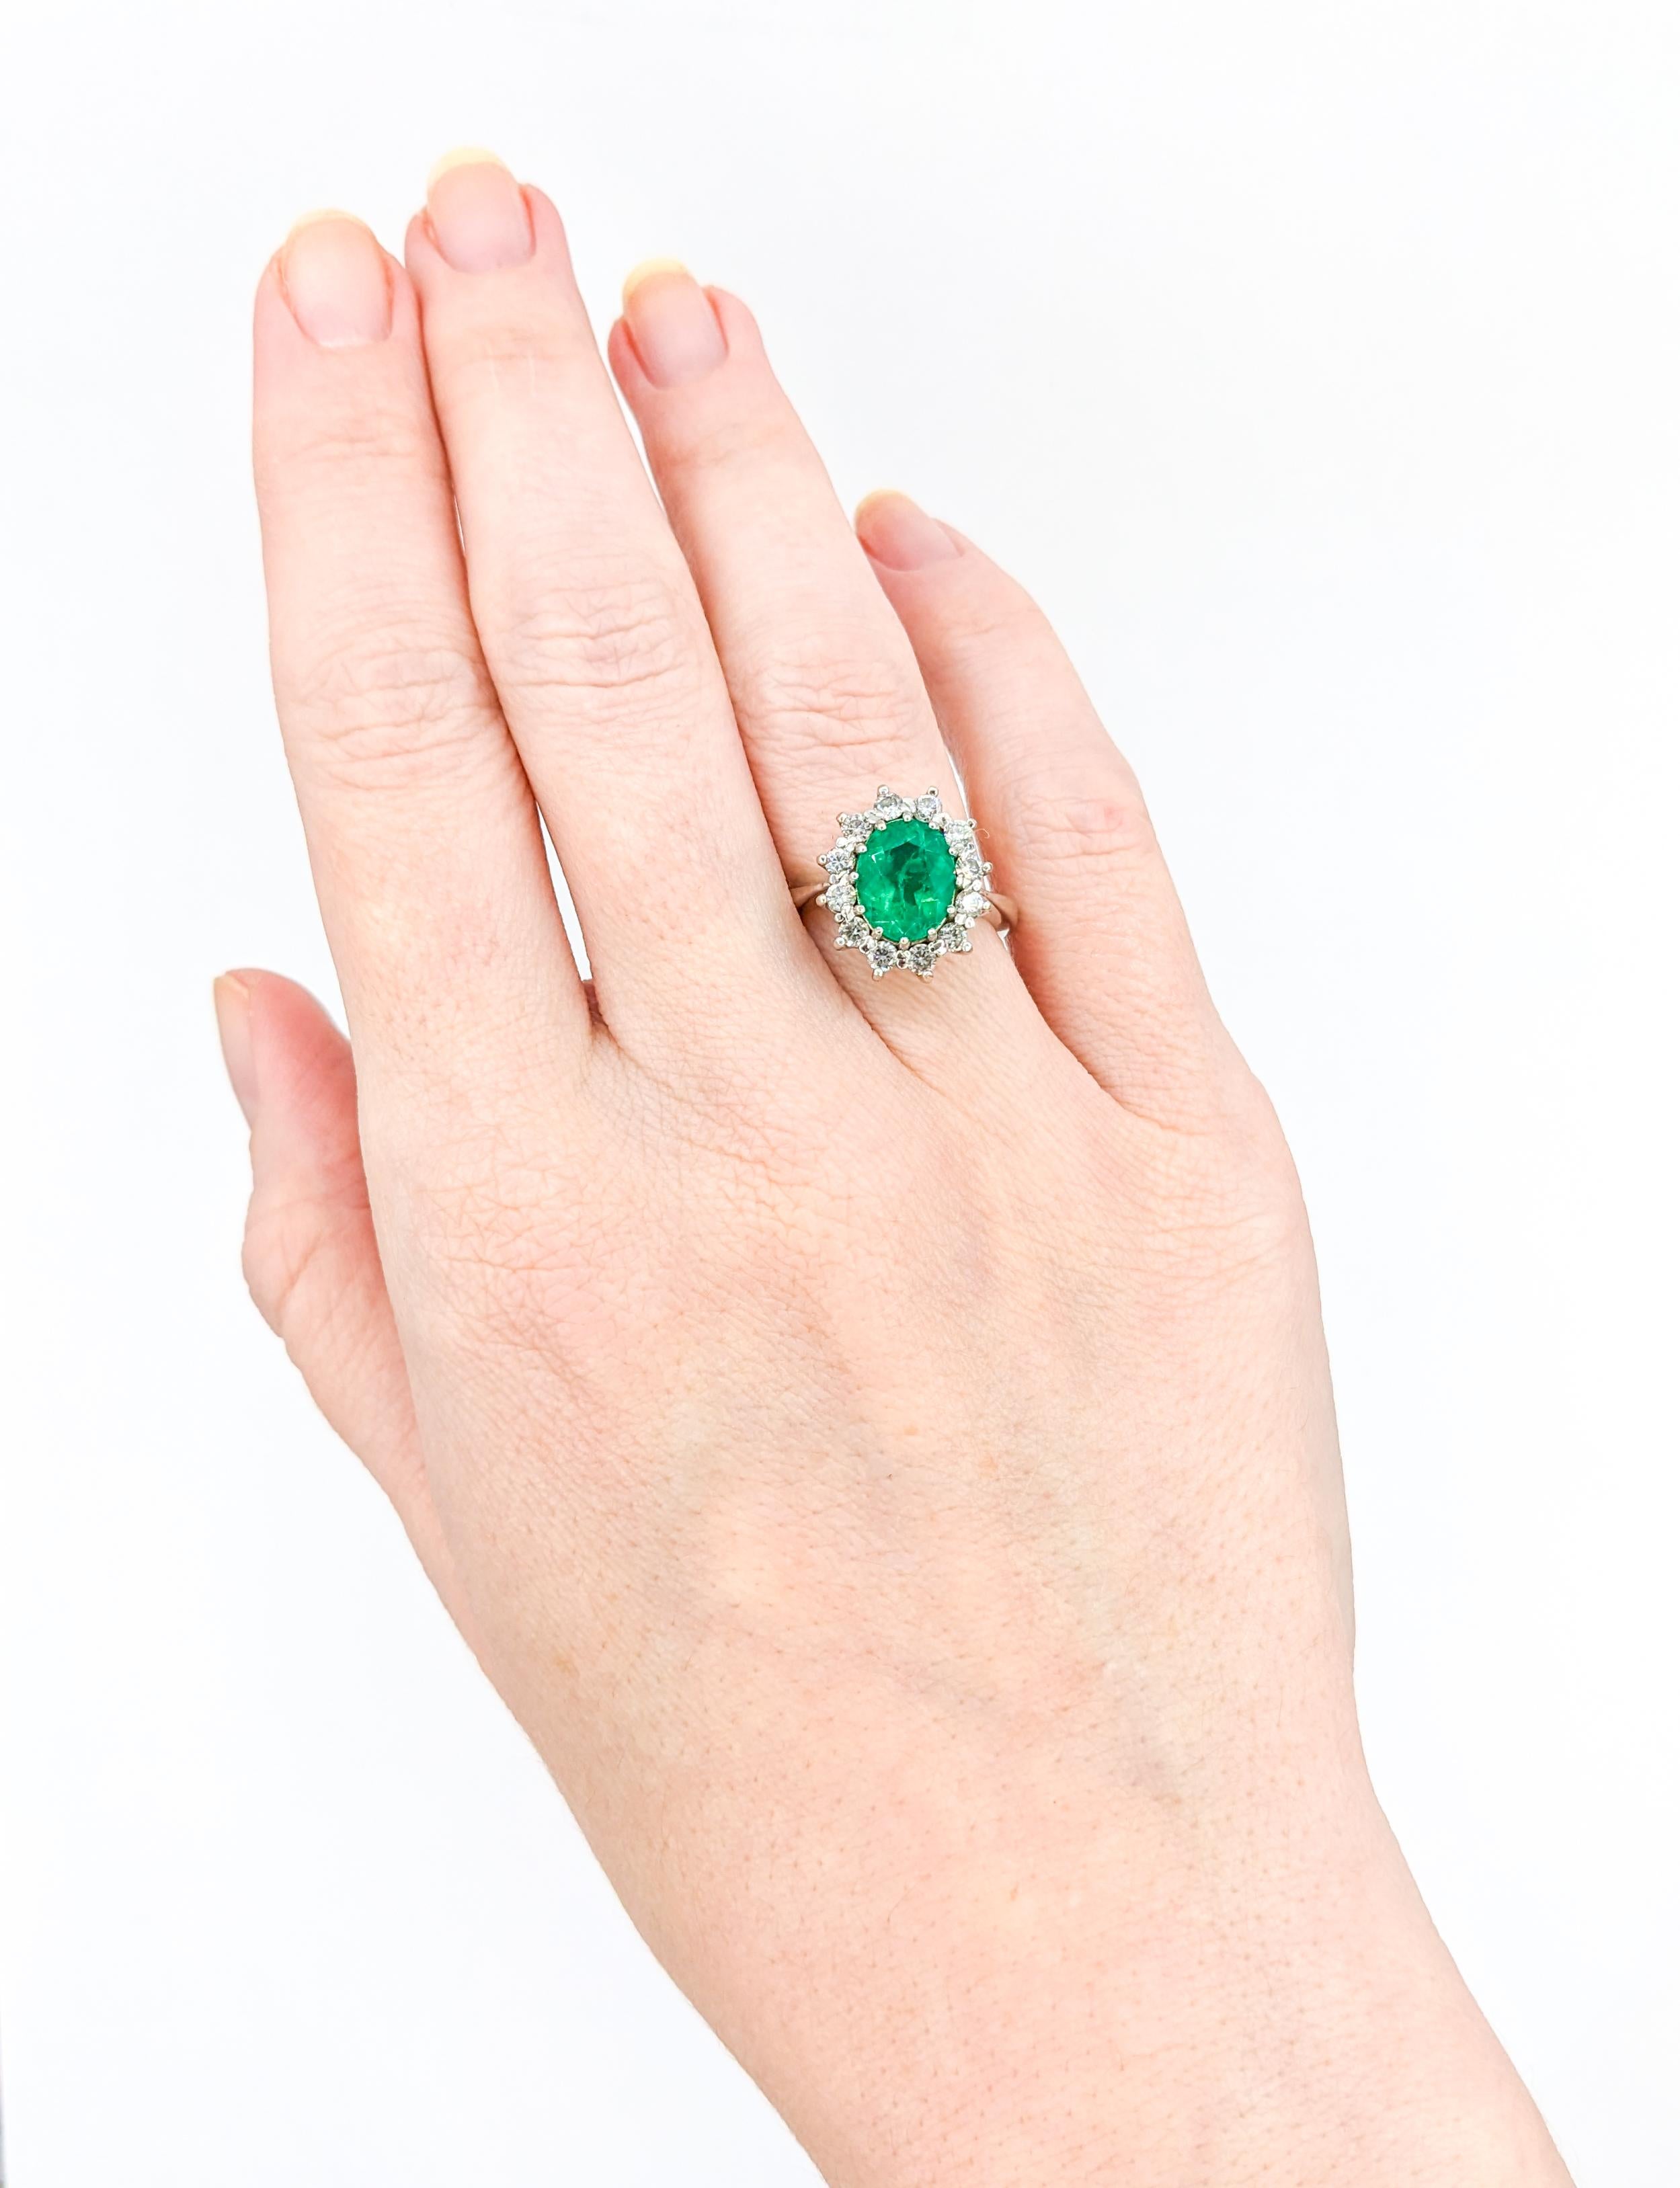 GIA 1.80ct Colombian Emerald & Diamond Halo Ring in White Gold

Experience timeless elegance with this stunning emerald Ring, masterfully crafted in 18K White Gold. This timeless ring features a stunning 1.80ct Colombian Emerald, complete with GIA